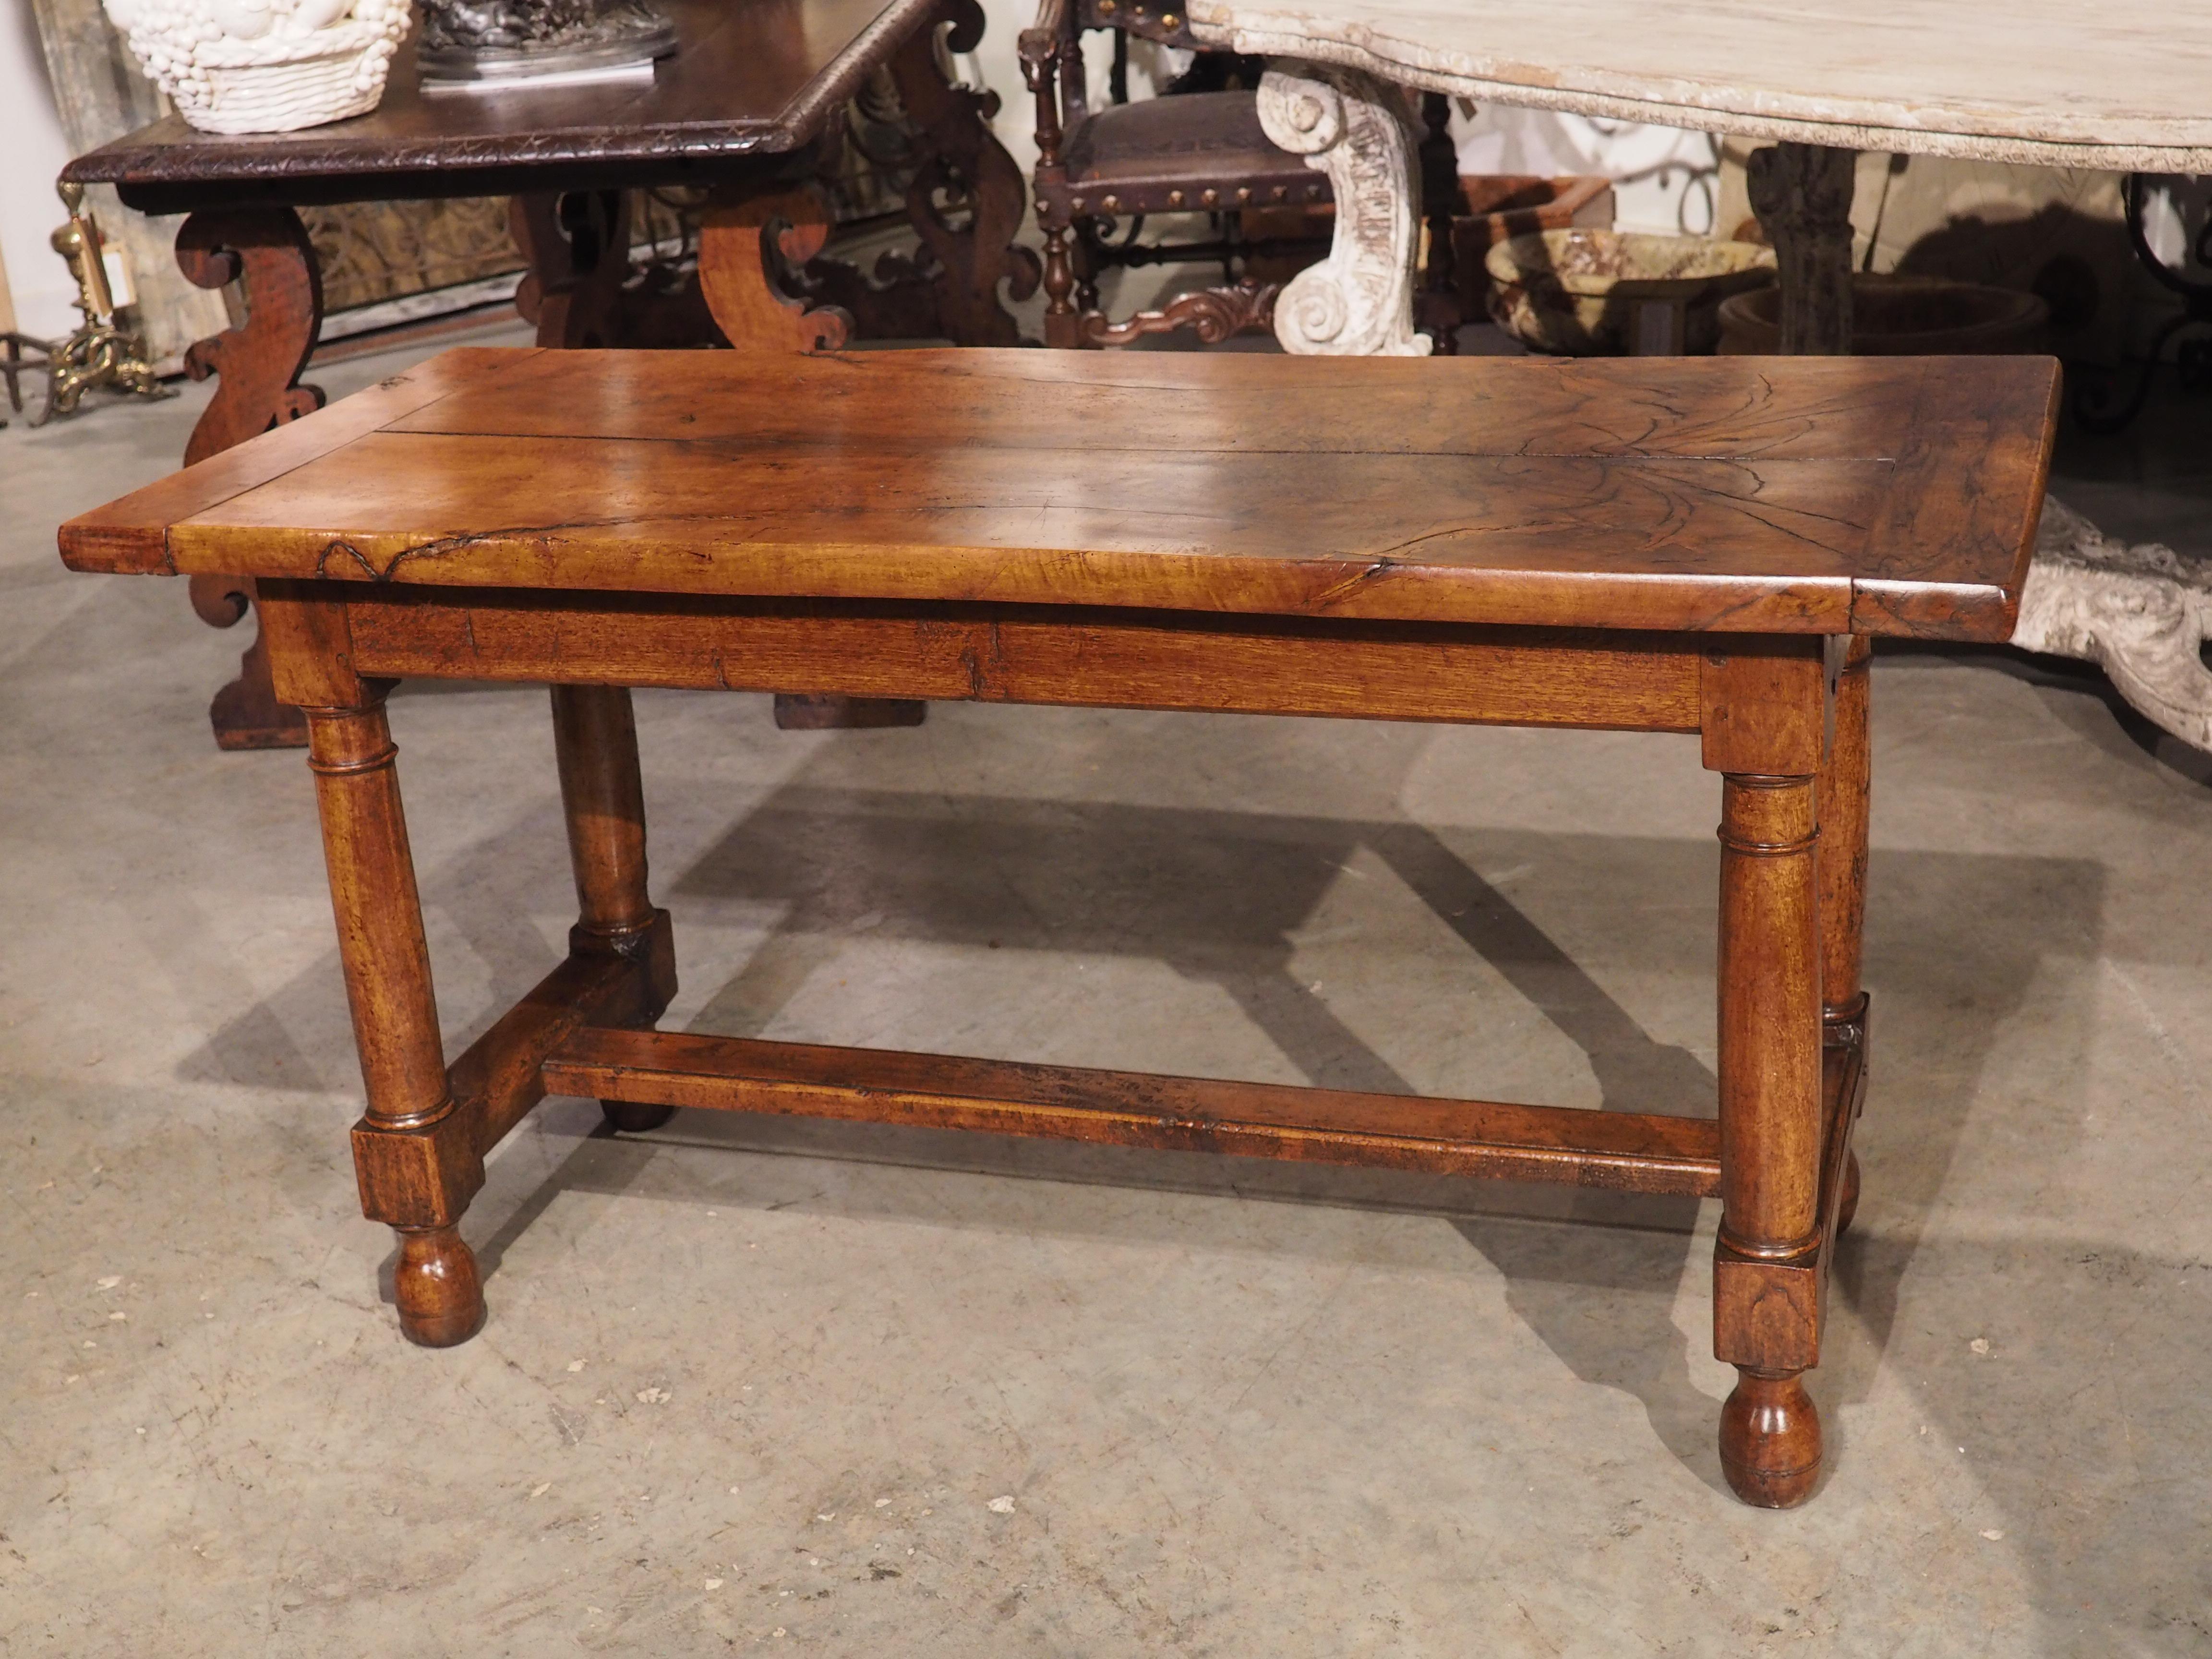 This handsome antique table is from Normandy and features an interesting single cut plank top with a beautiful burl wood grain.  The thick walnut plank top was originally cut into two sections to provide longevity and stability to the wood.  Larger